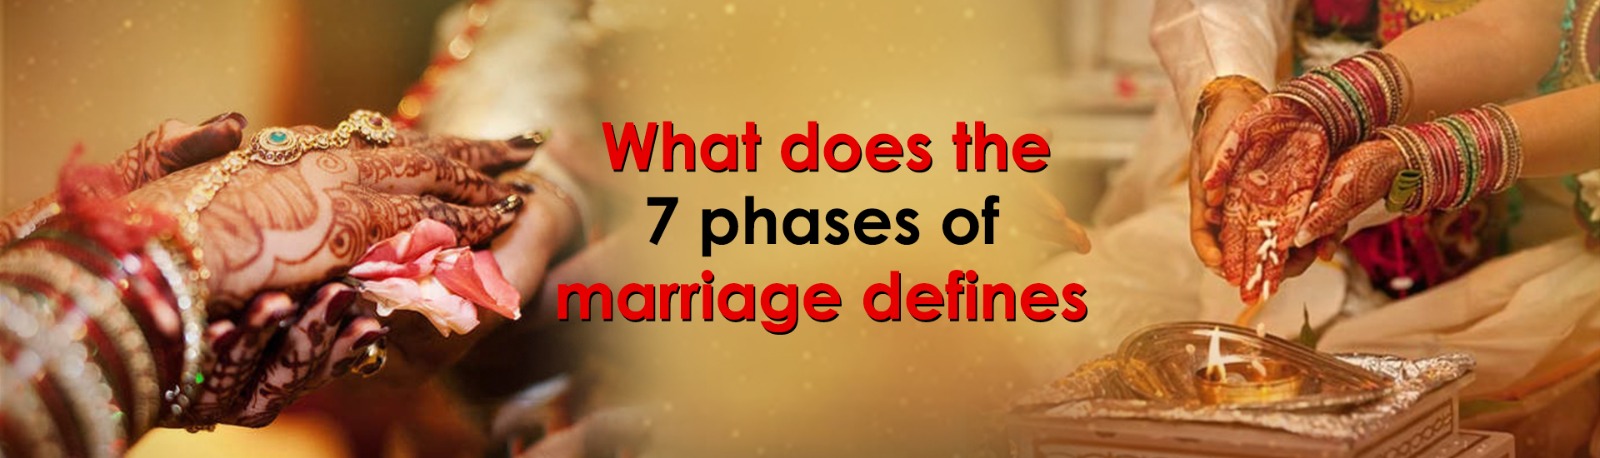 WHAT DOES THE 7 PHASES OF MARRIAGE DEFINES?